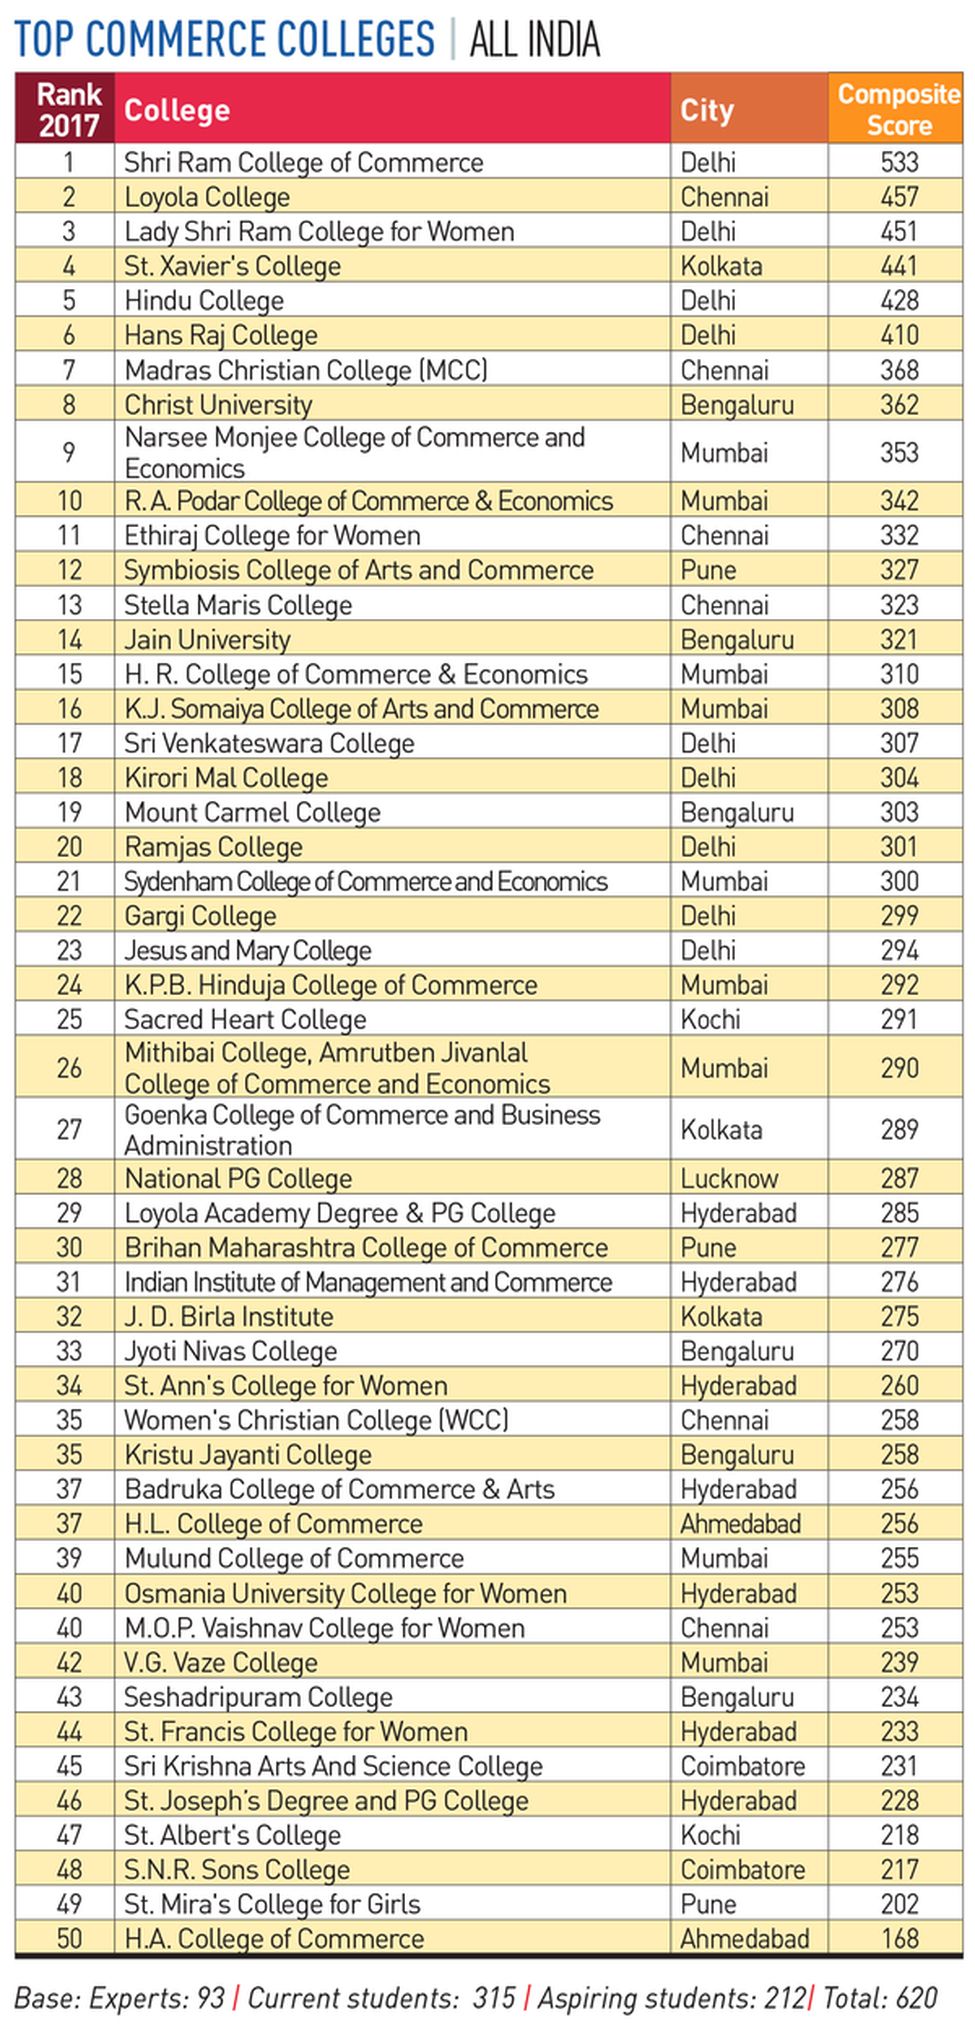 78-COMMERCE-COLLEGES